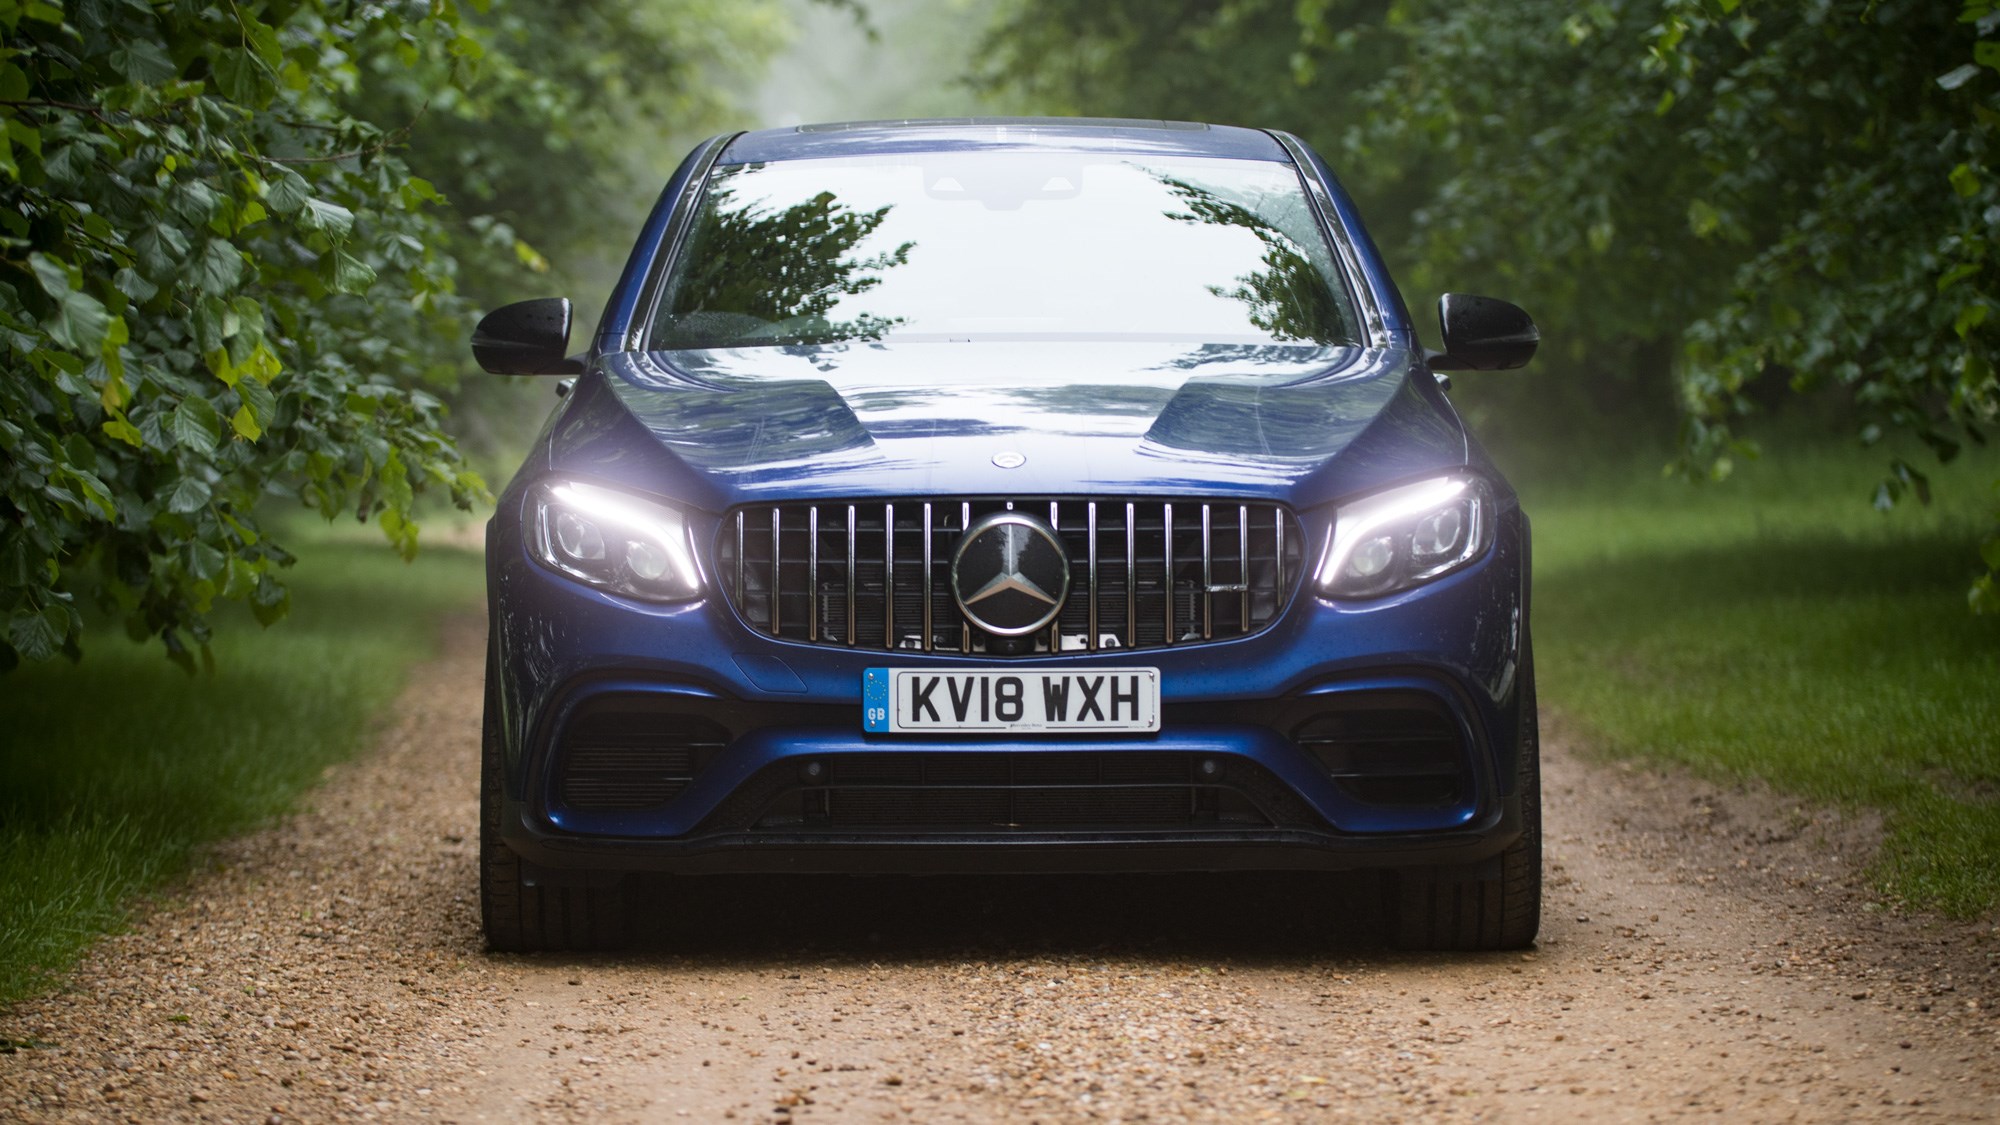 Mercedes-AMG GLC63 S review: as subtle as a sledgehammer